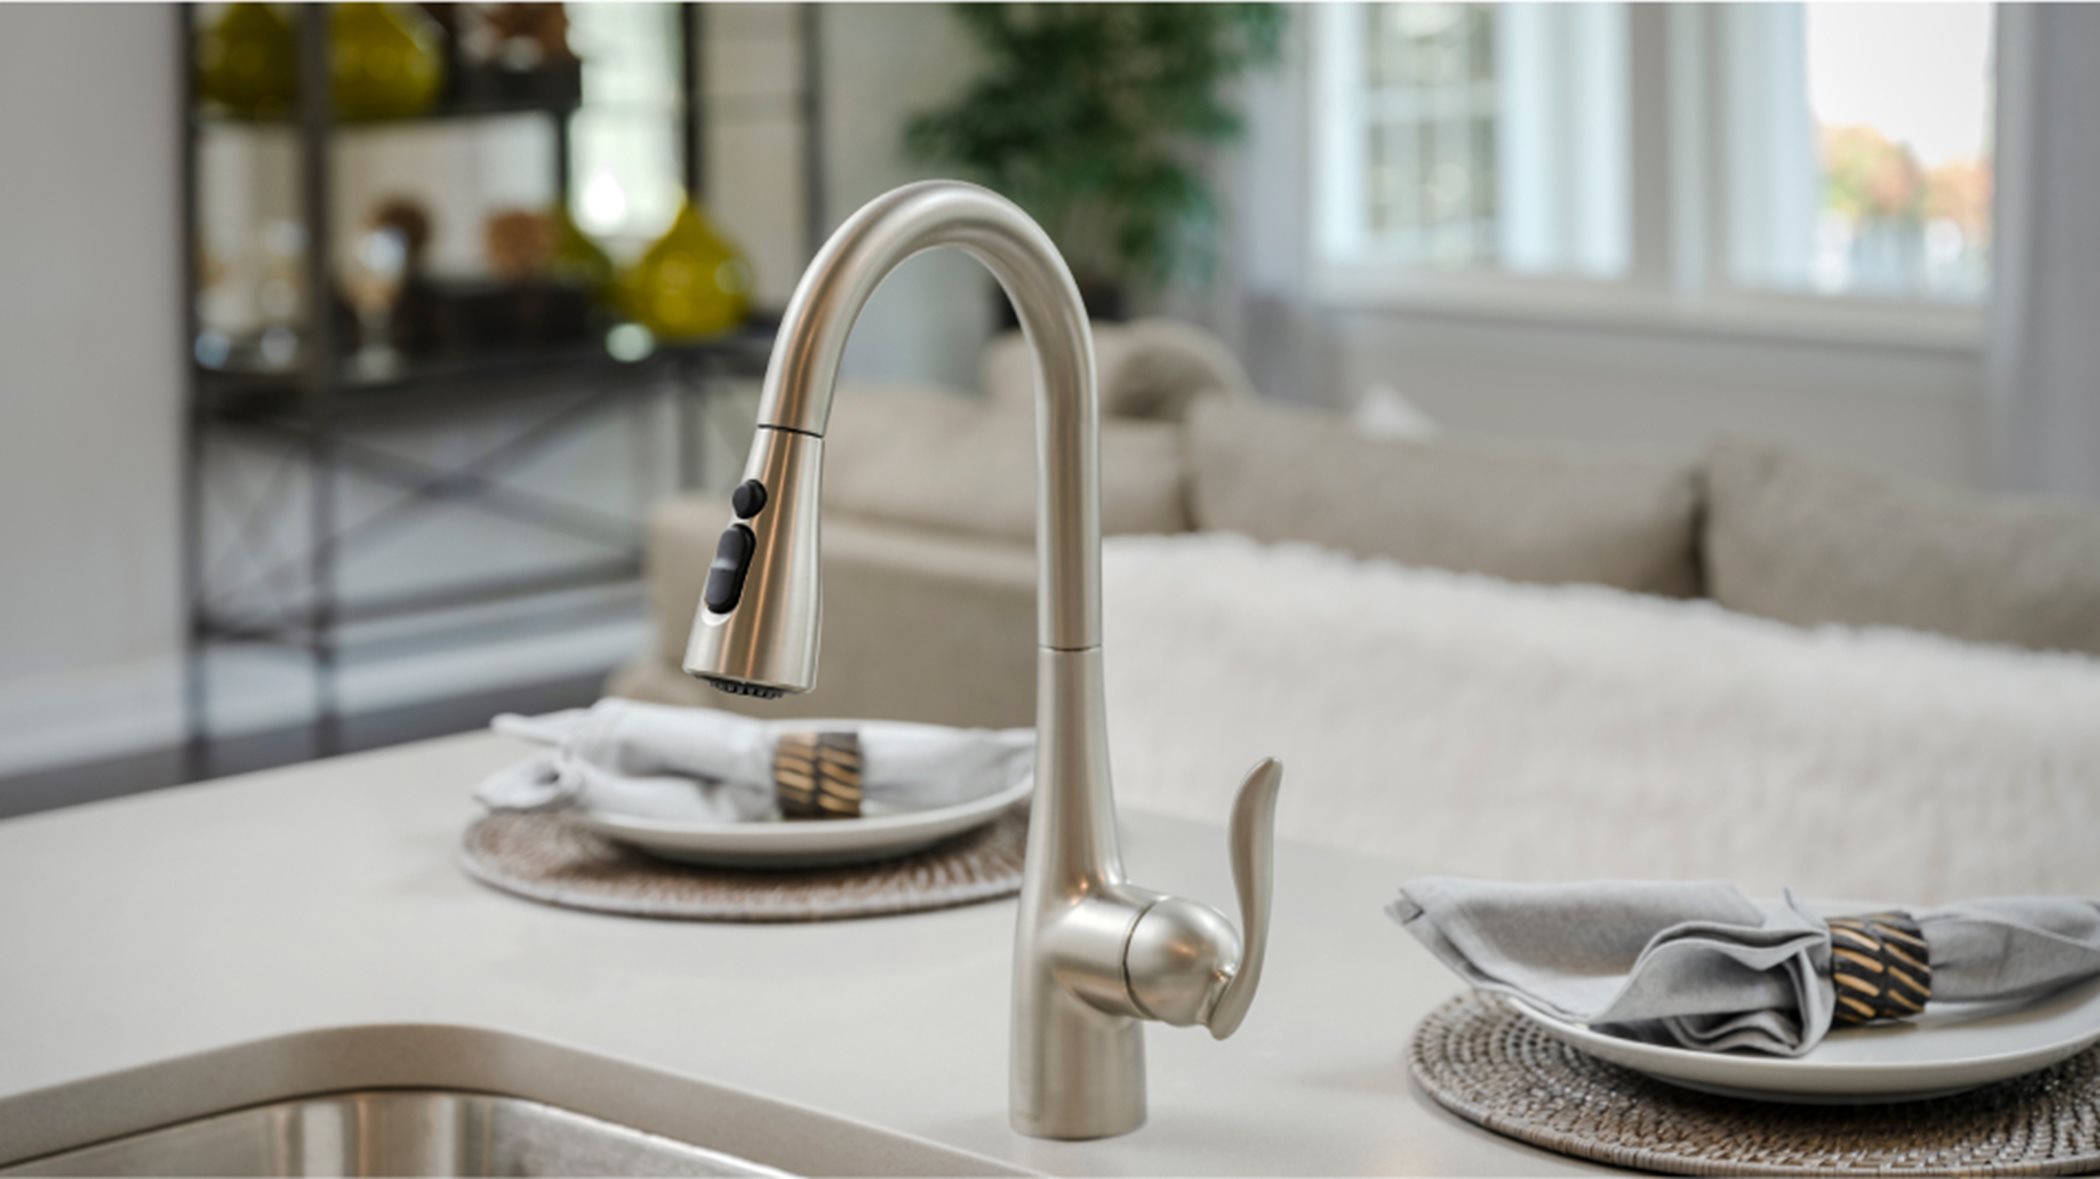 James Kitchen Faucet and sink